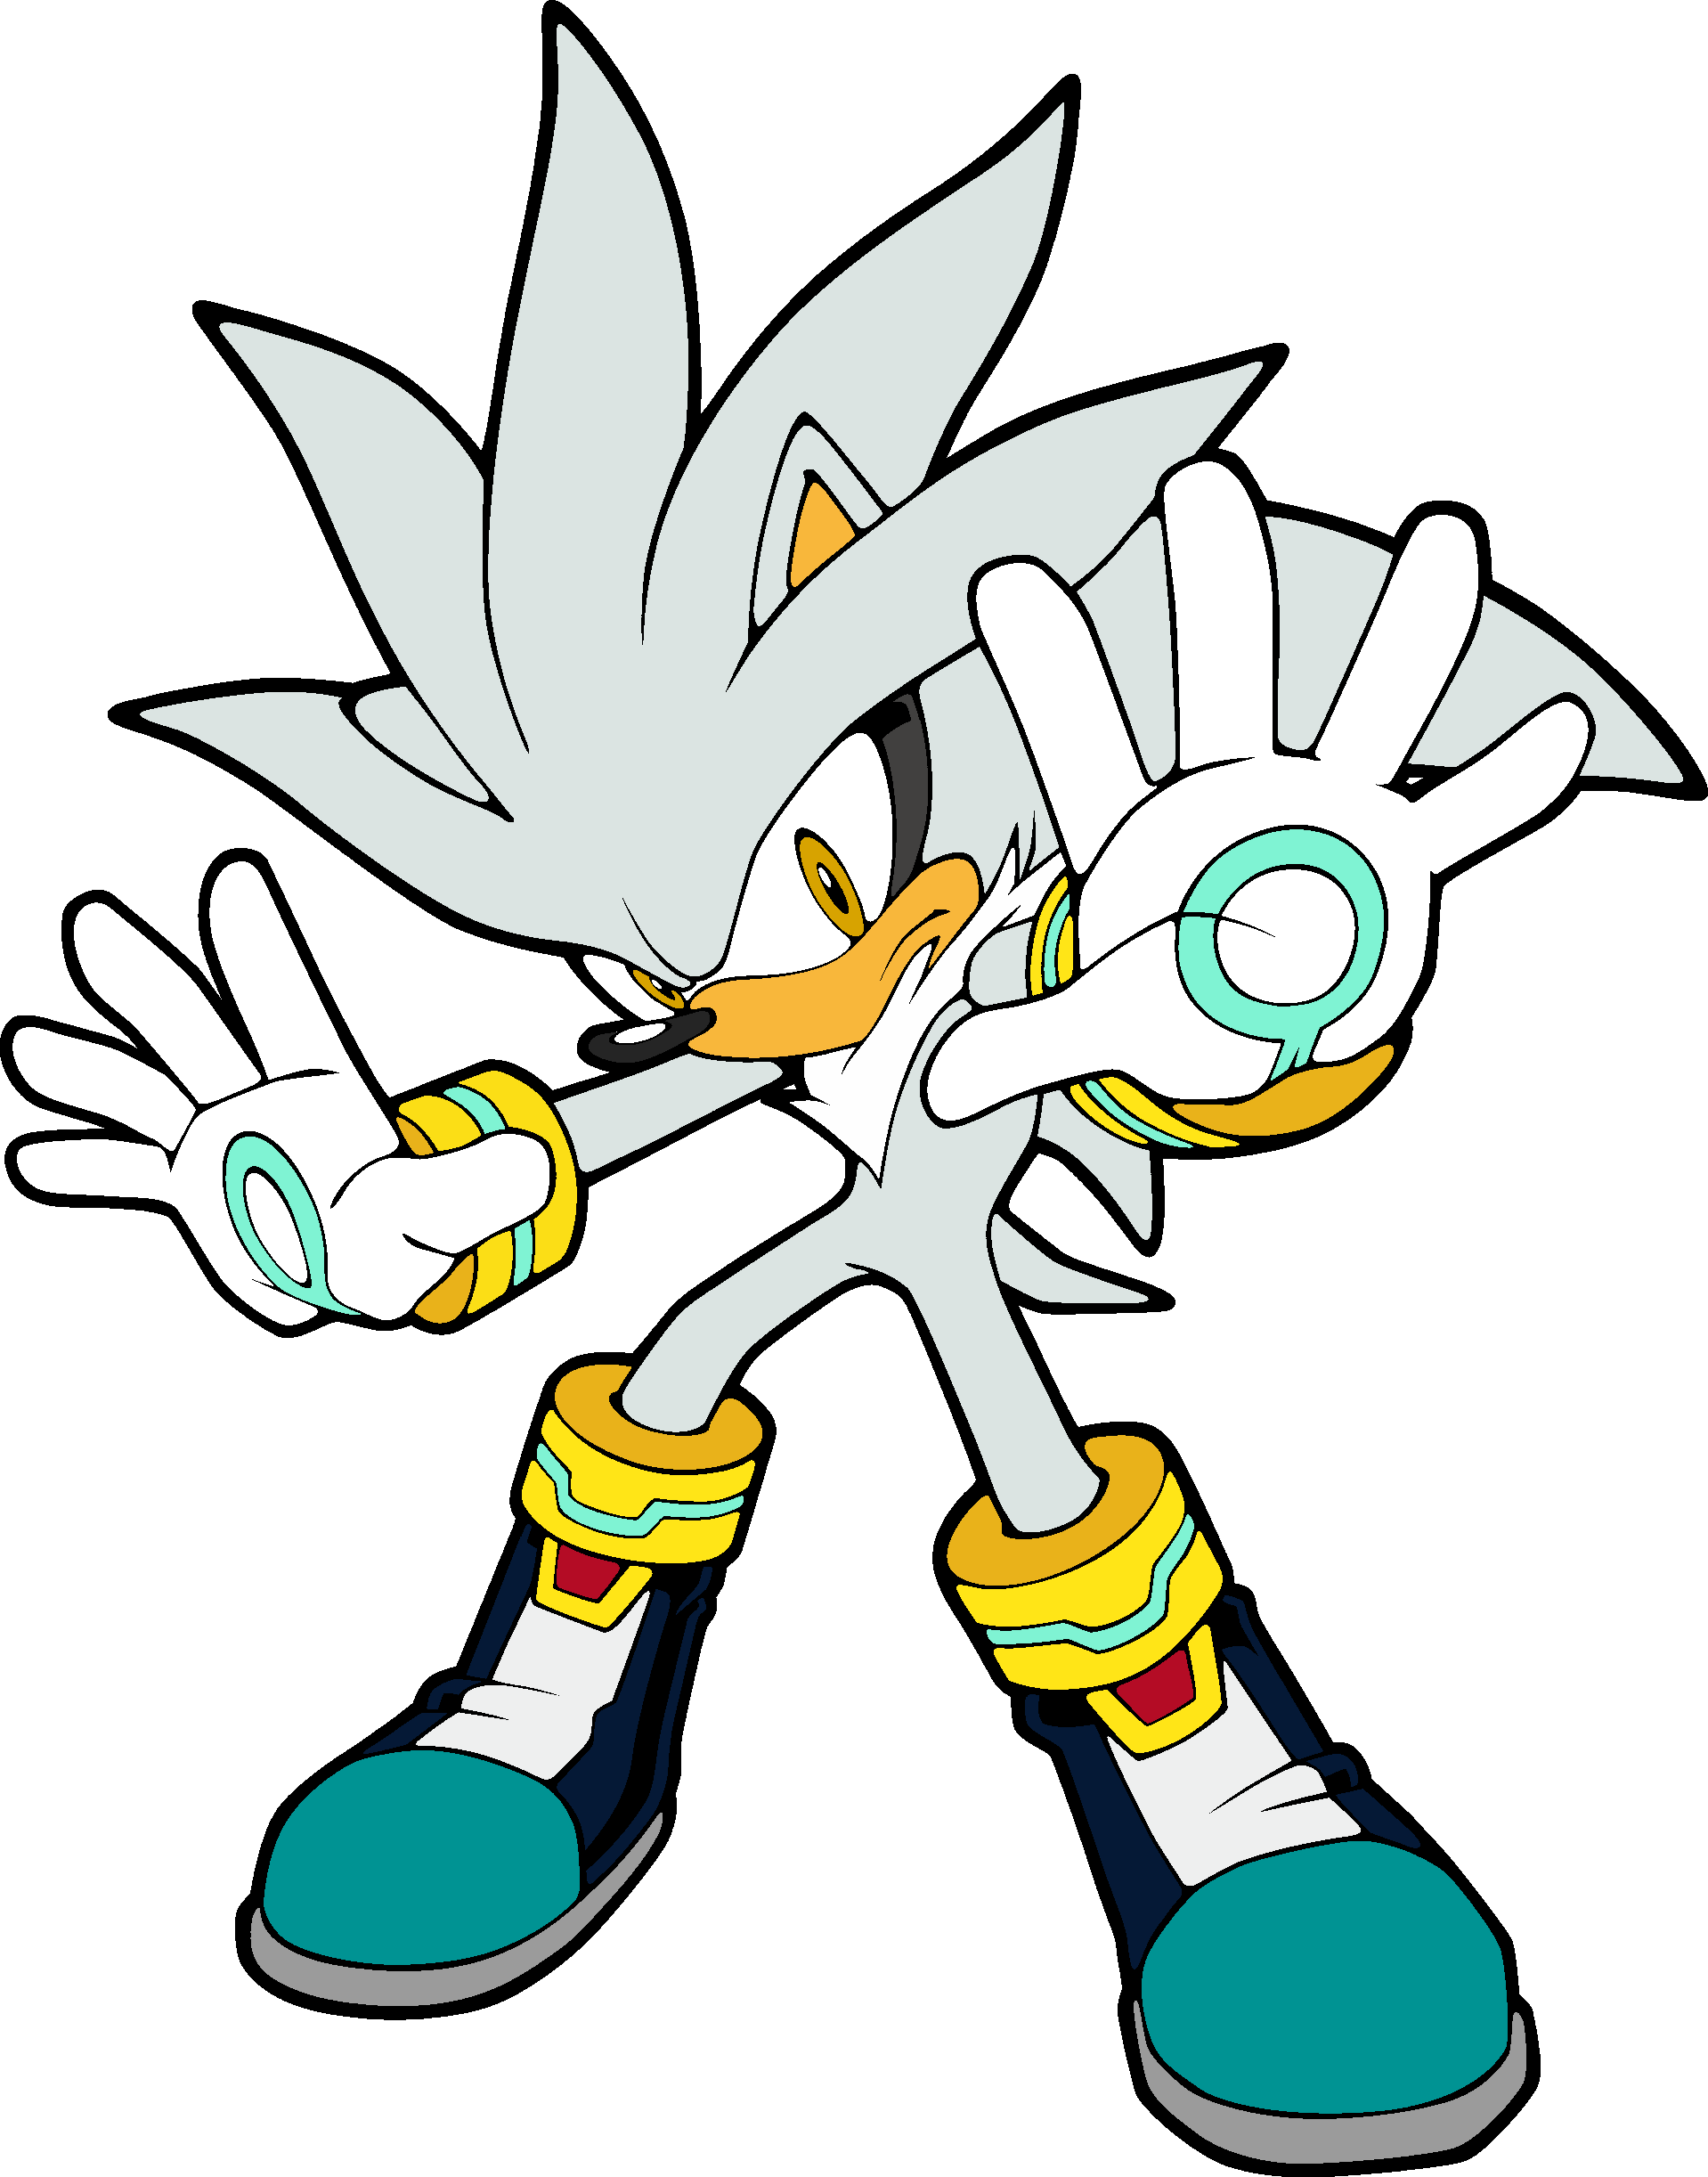 How To Draw Silver The Hedgehog Easy - alter playground